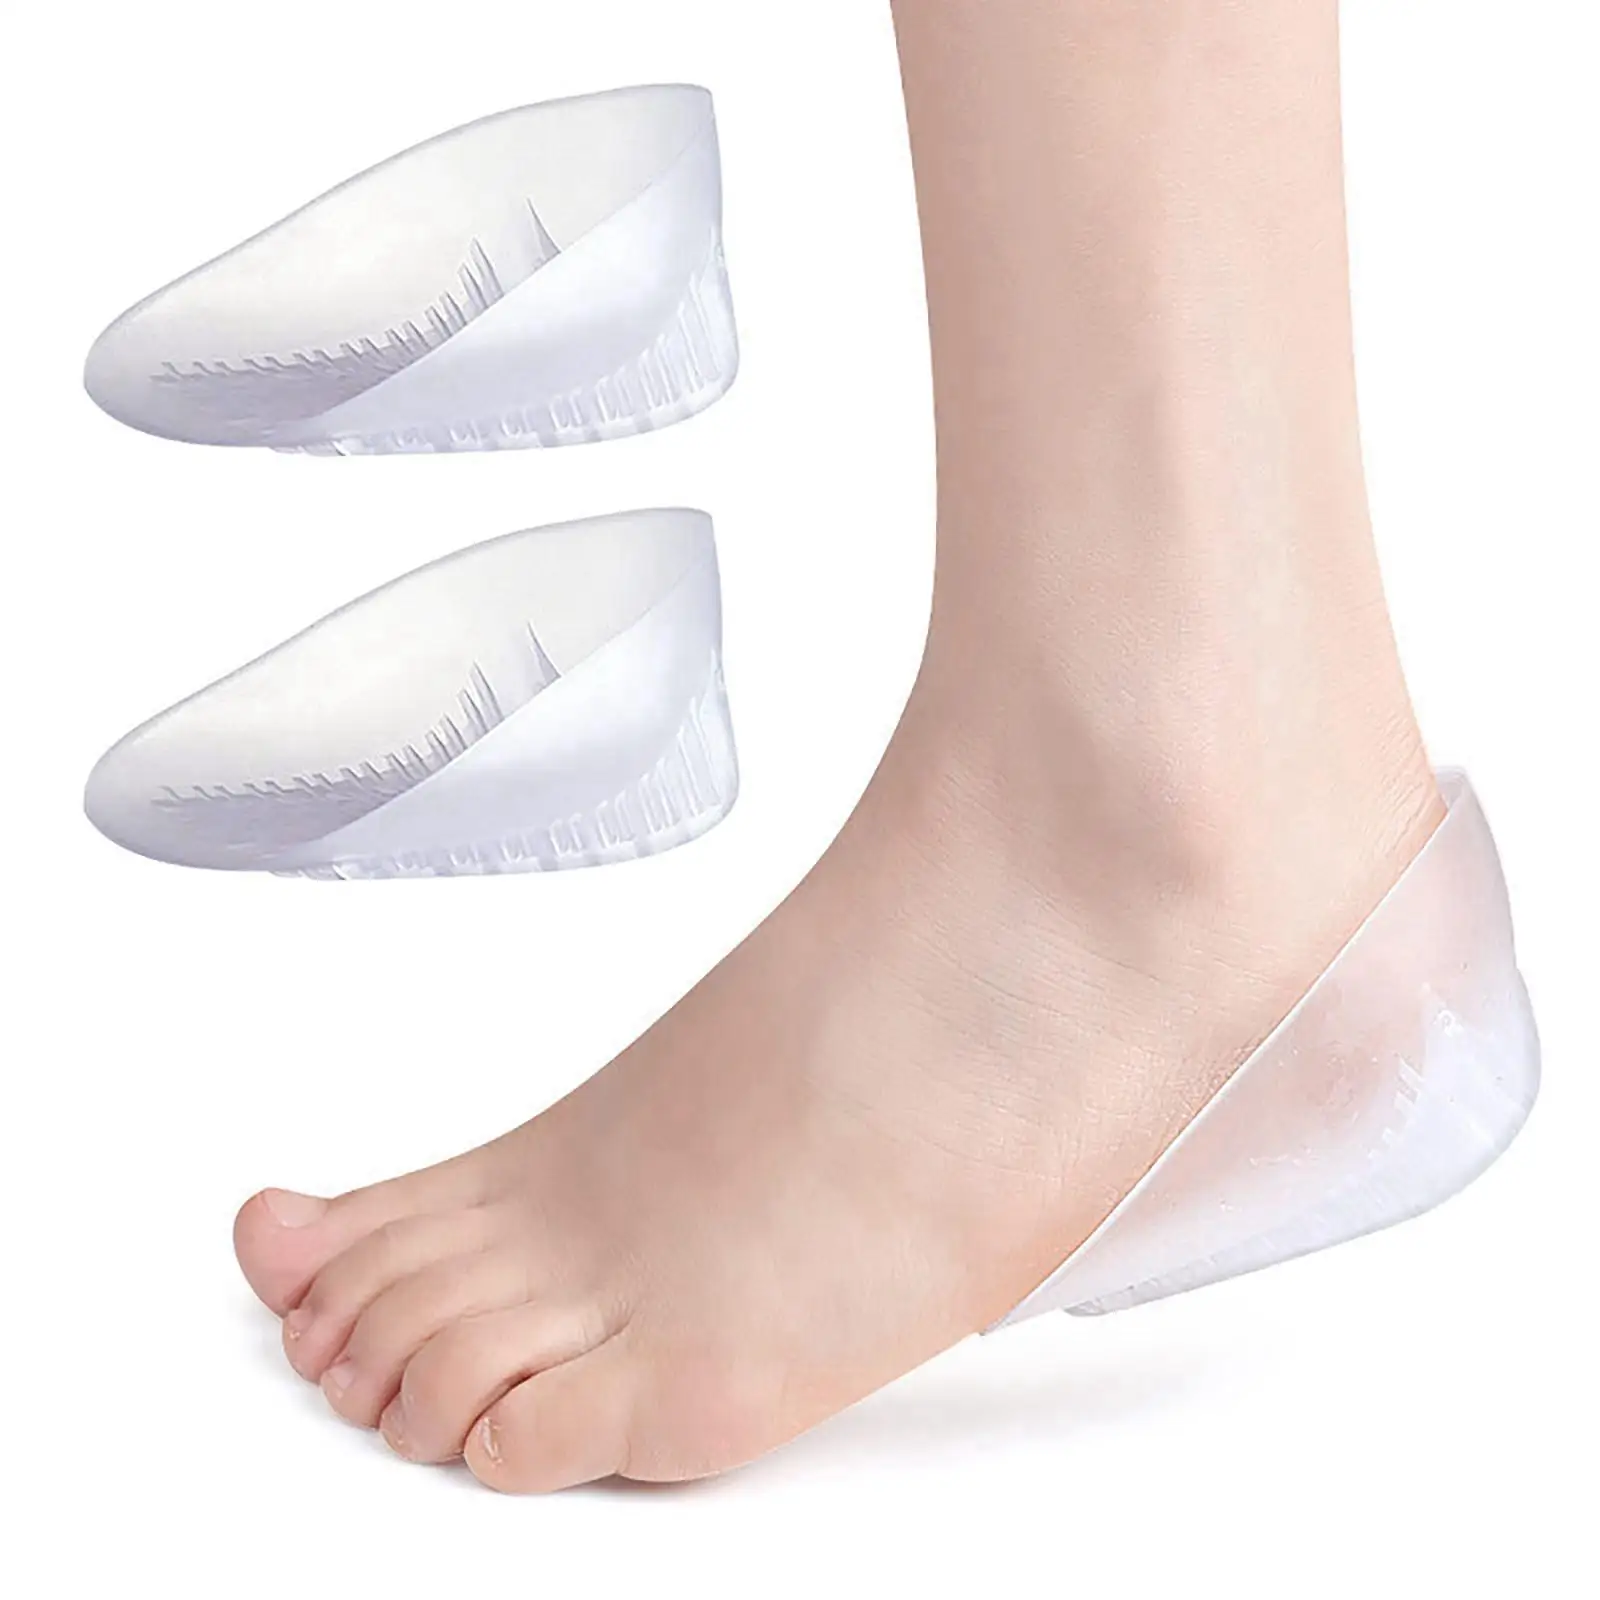 2 Pieces U Shaped Heel Cup Pads Support Comfortable Cushion Insert for Plantar Fasciitis Sore Heel Bone Spurs Foot Care Clear